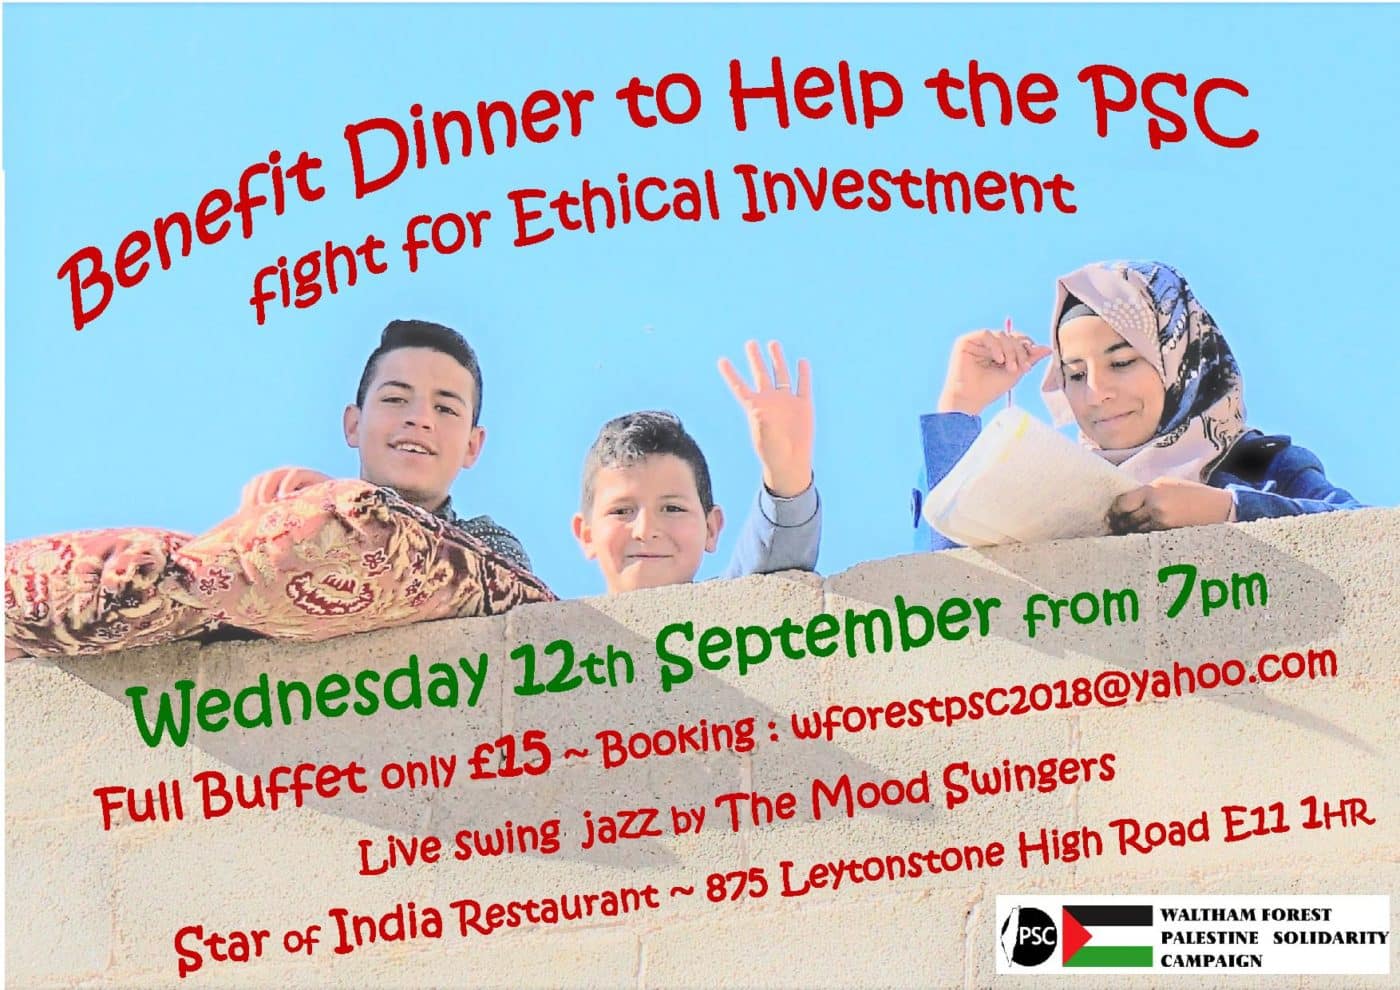 Benefit Dinner to Help PSC